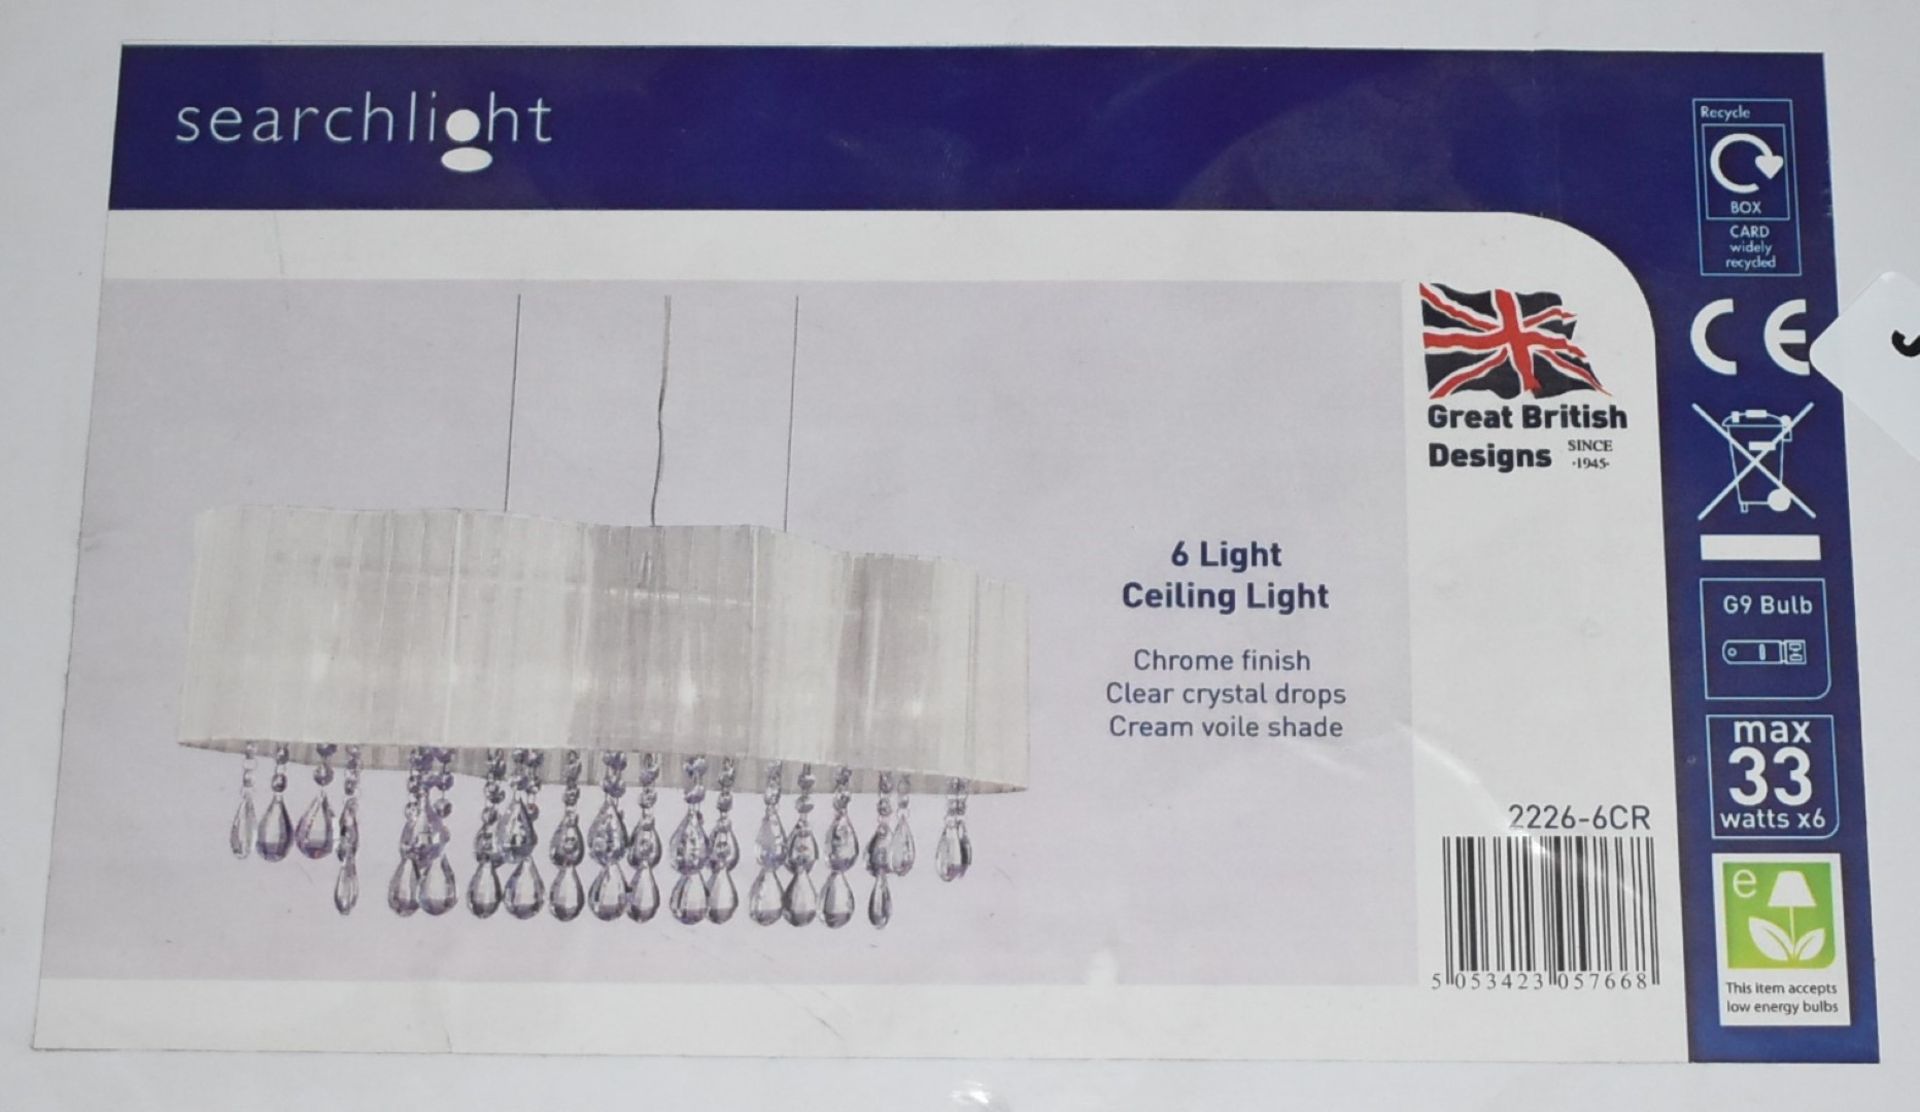 1 x Searchlight 6 Light Ceiling Light - Chrome Finish, Clear Crystal Drops and Cream Voile Shade - Image 2 of 5